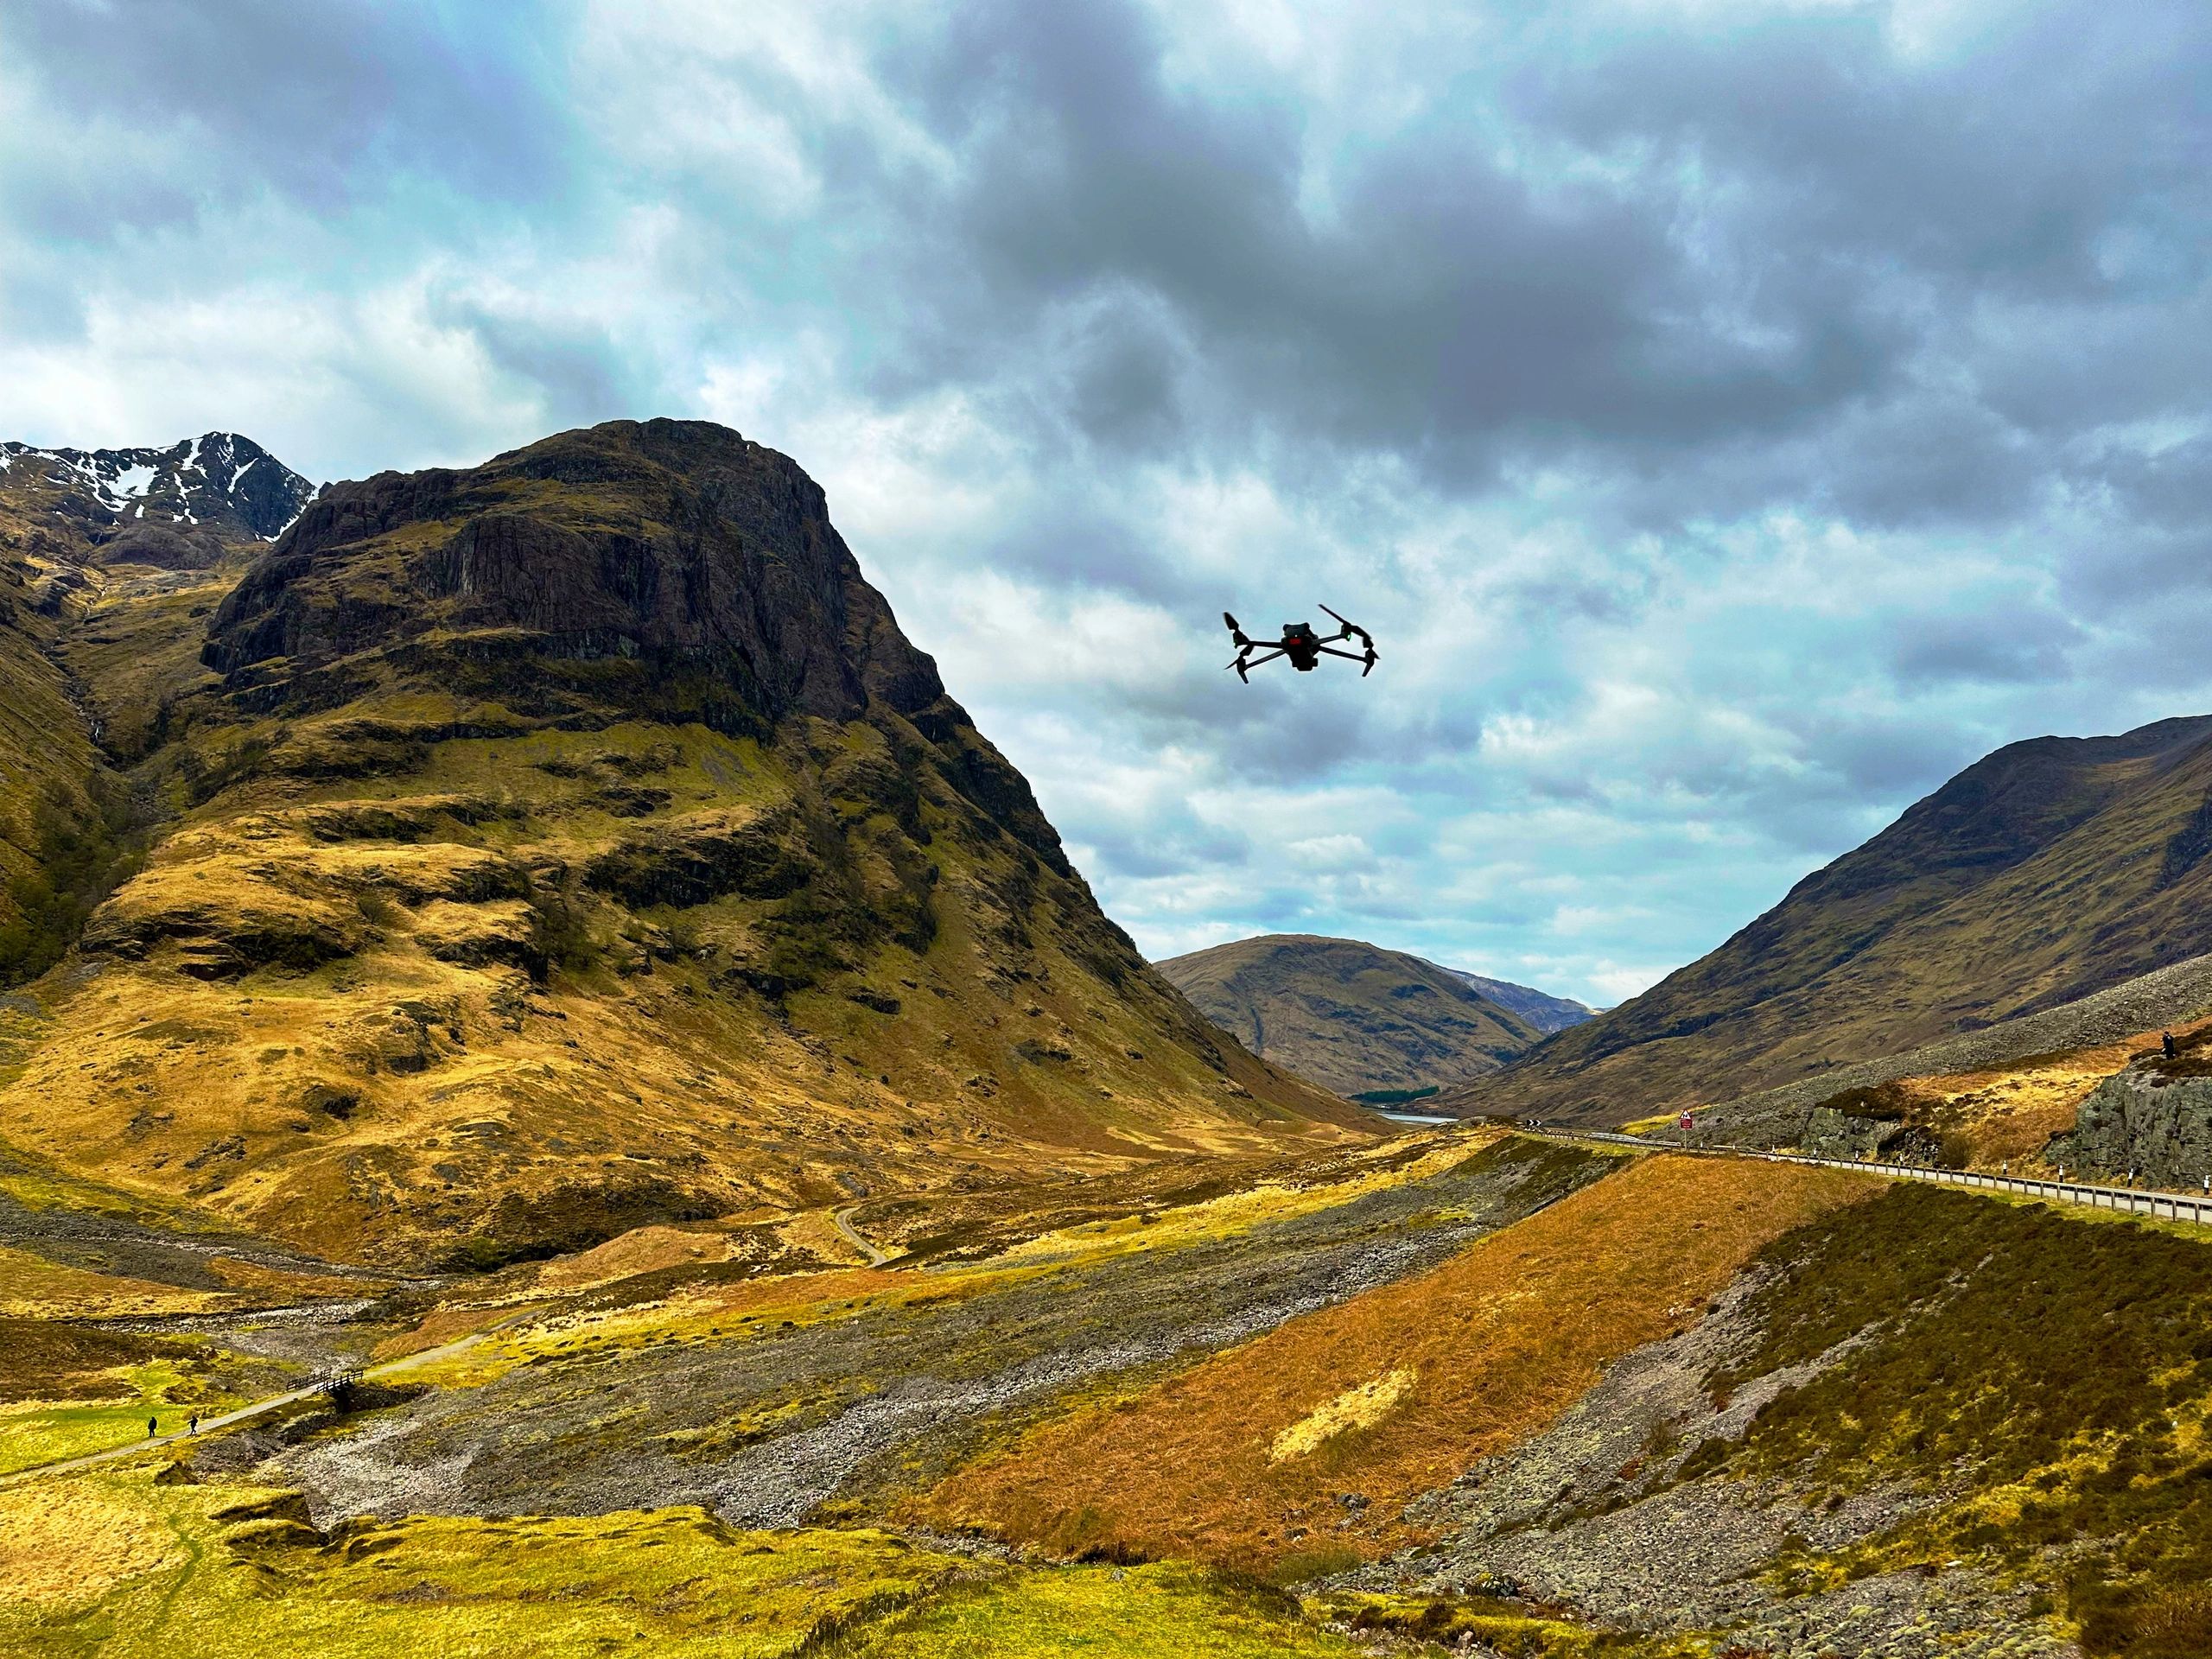 Mavic 3 looking west down Glen Coe with the 3 Sisters of Glen Coe on the left